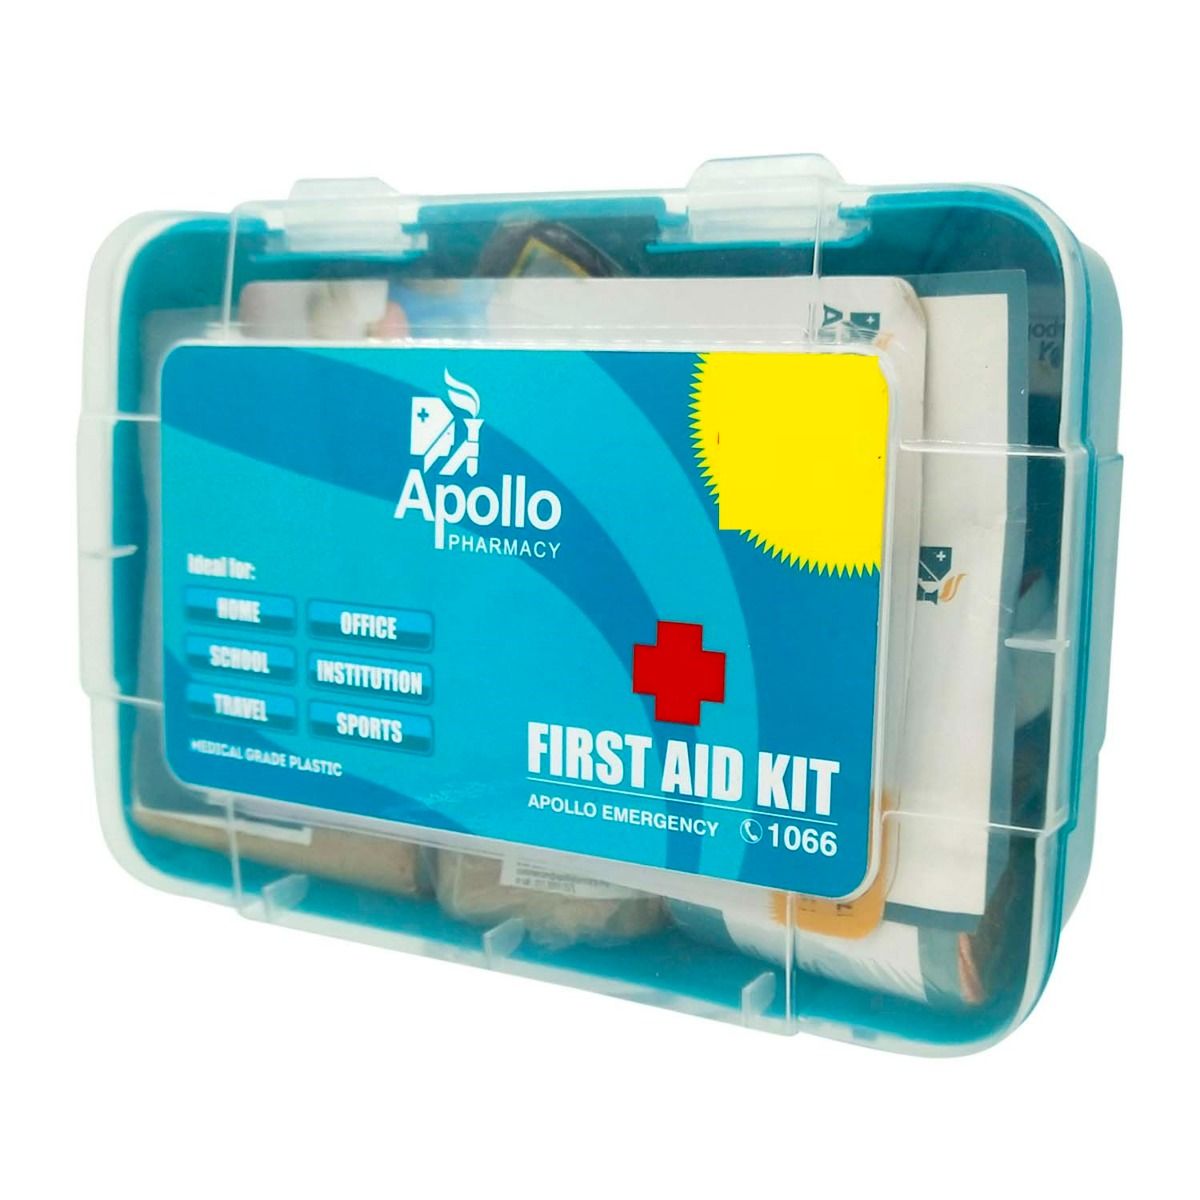 Buy Apollo Pharmacy First Aid Kit, 1 Count Online